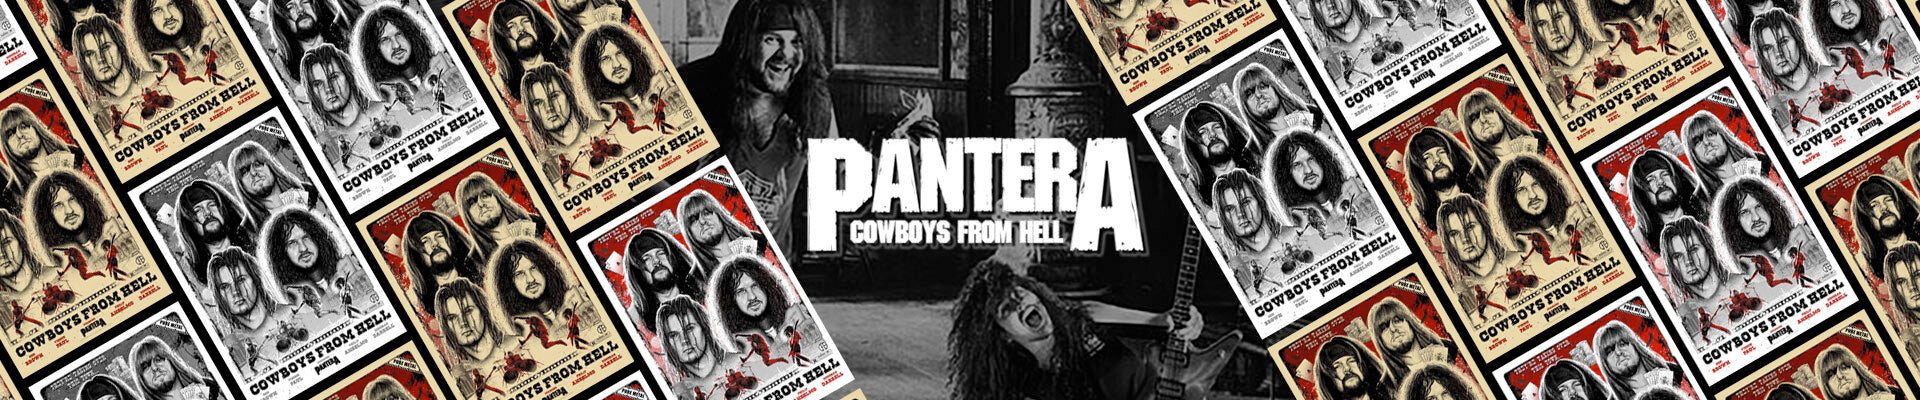 Behind the Poster: Pantera Cowboys From Hell 30th Anniversary